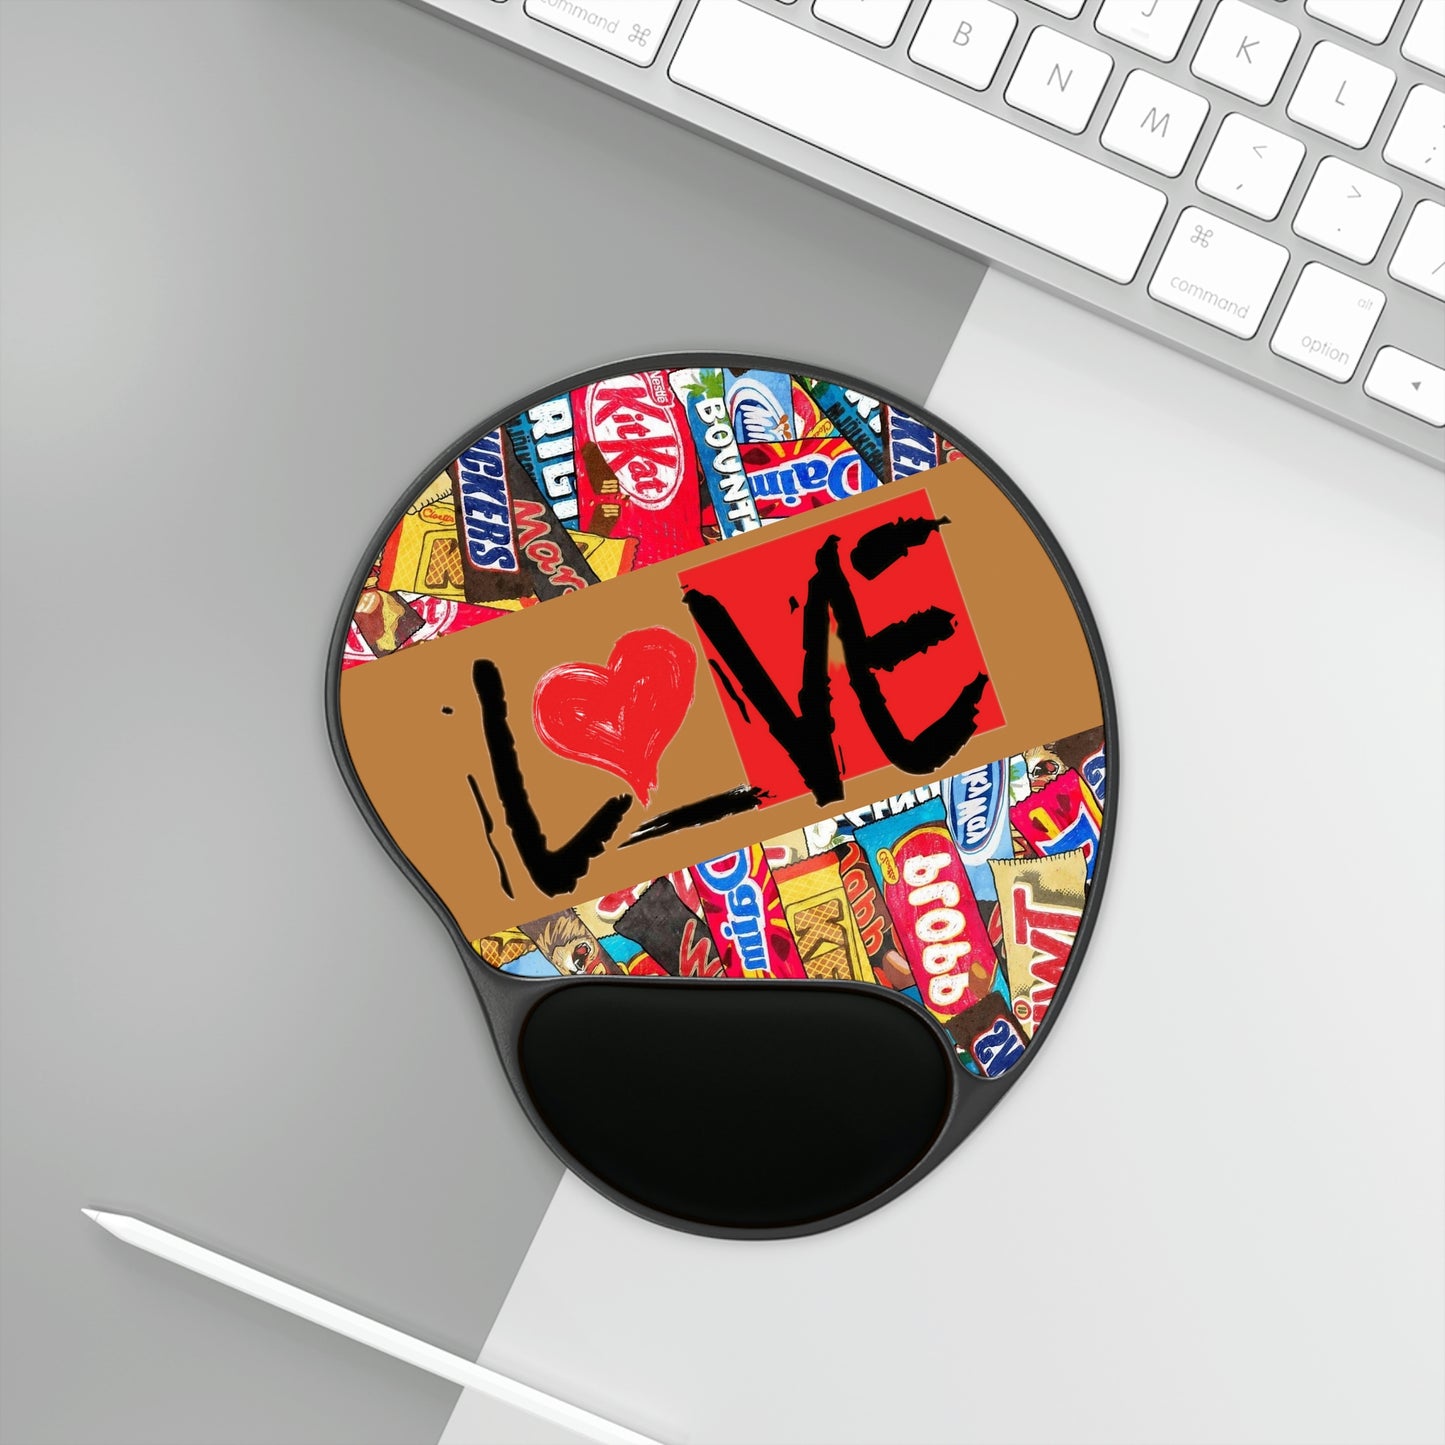 Sean Breed Candybar L❤️VERz  Mouse Pad With Wrist Rest